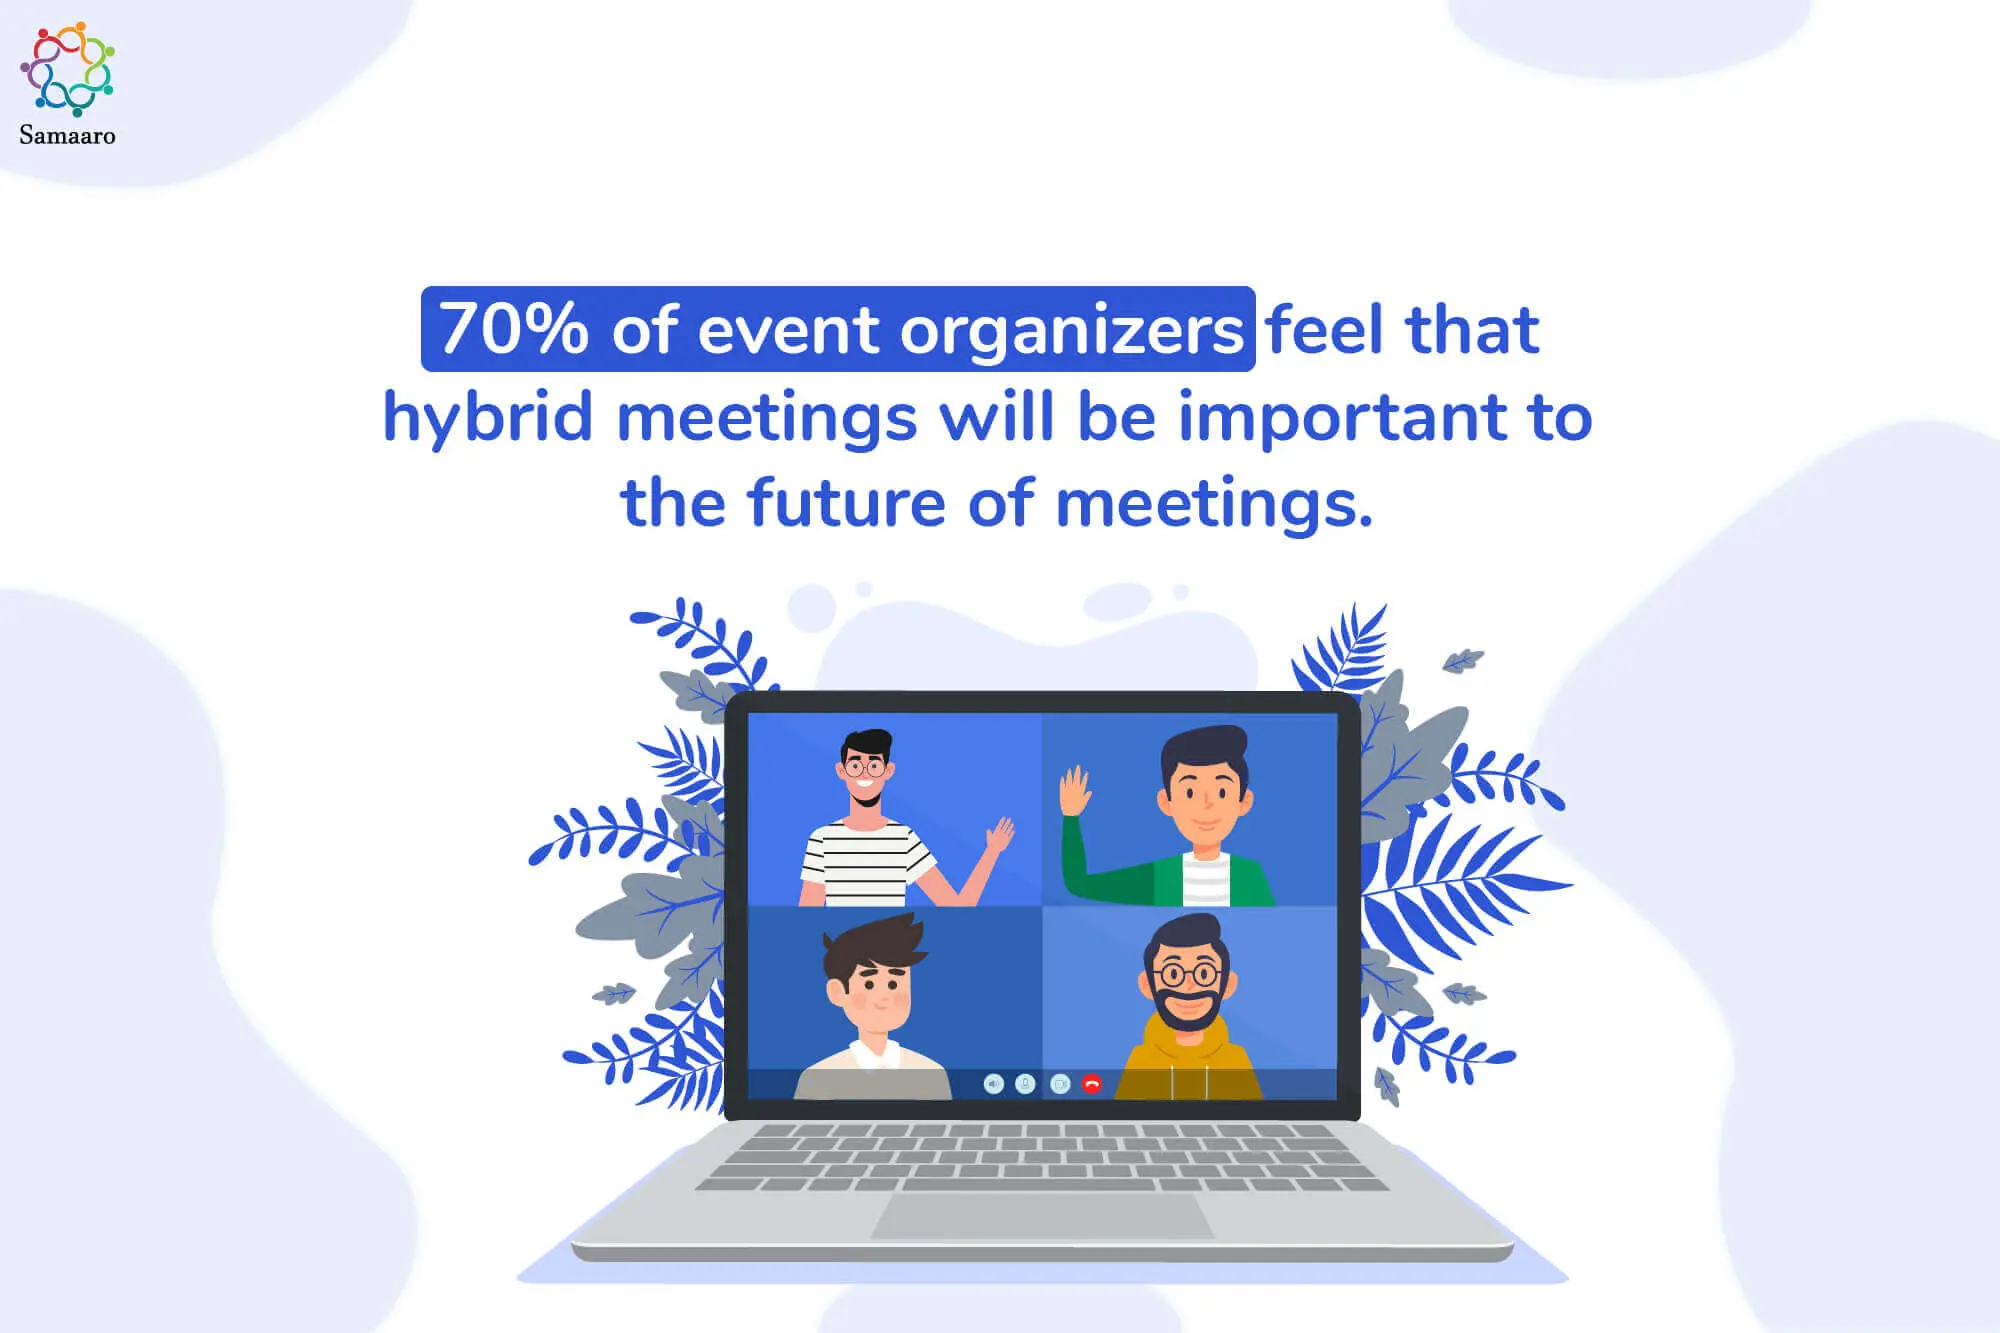 70% of business owners and event managers feel hybrid meetings are the future